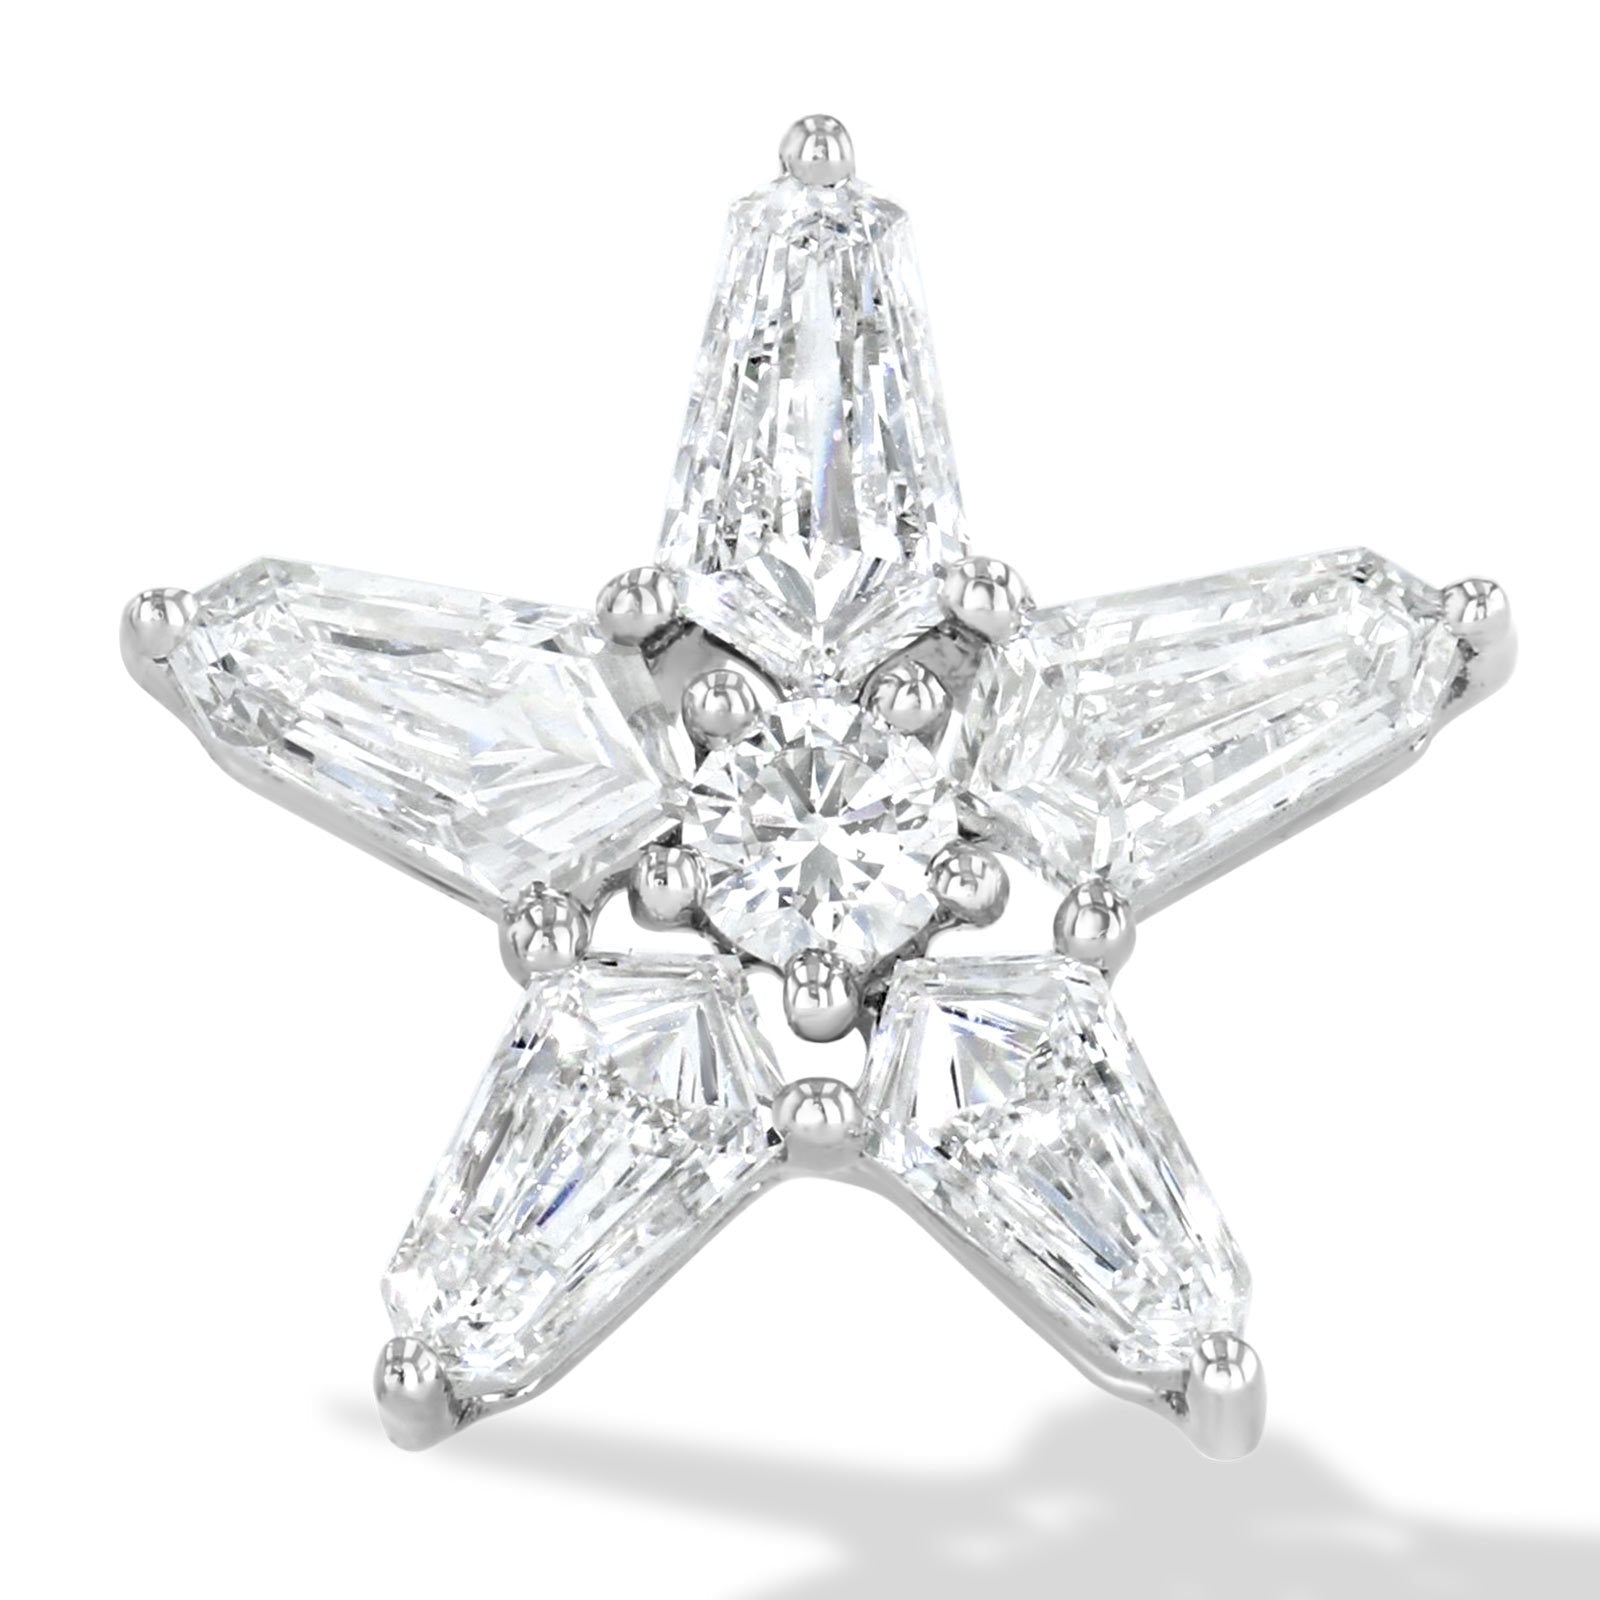 Sirius Star Studs I Diamond Stud Earrings I 64Facets Fine Jewely Single (1 Earring) / White Gold